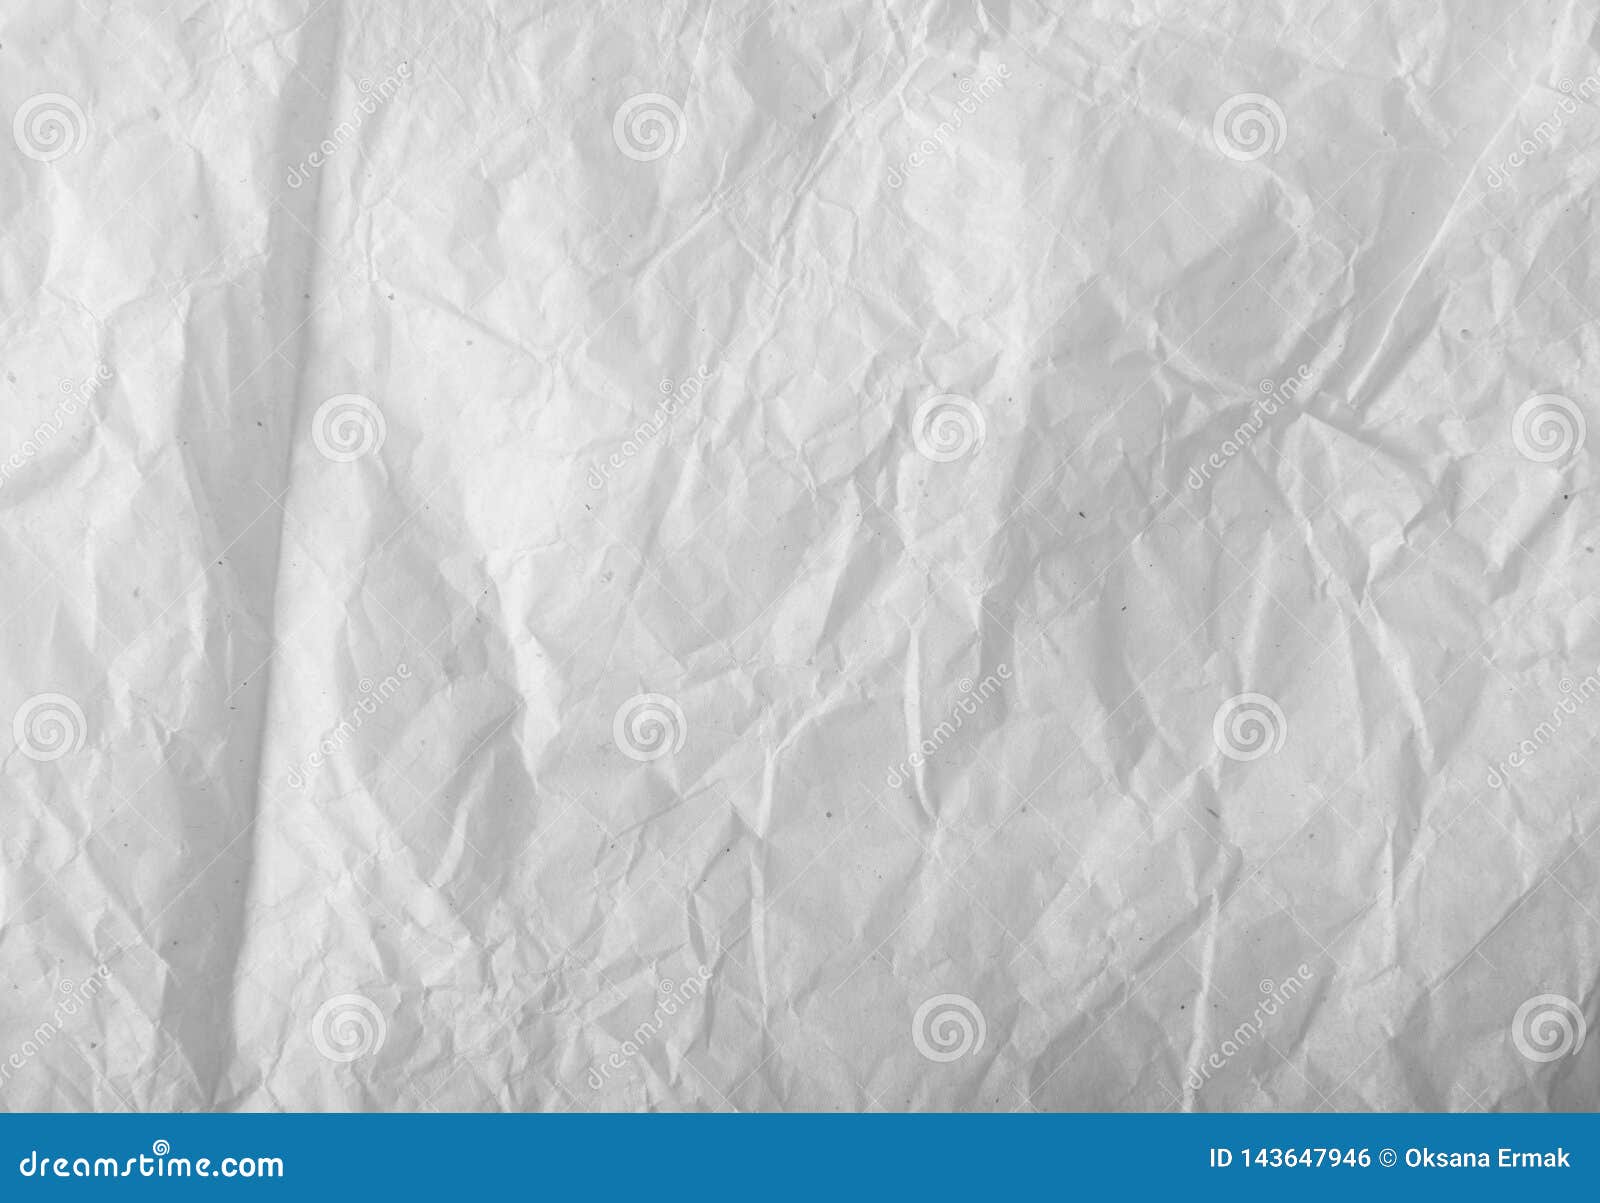 Sheet Of White Thin Crumpled Craft Paper Background Stock Photo Image of rugged, abstract